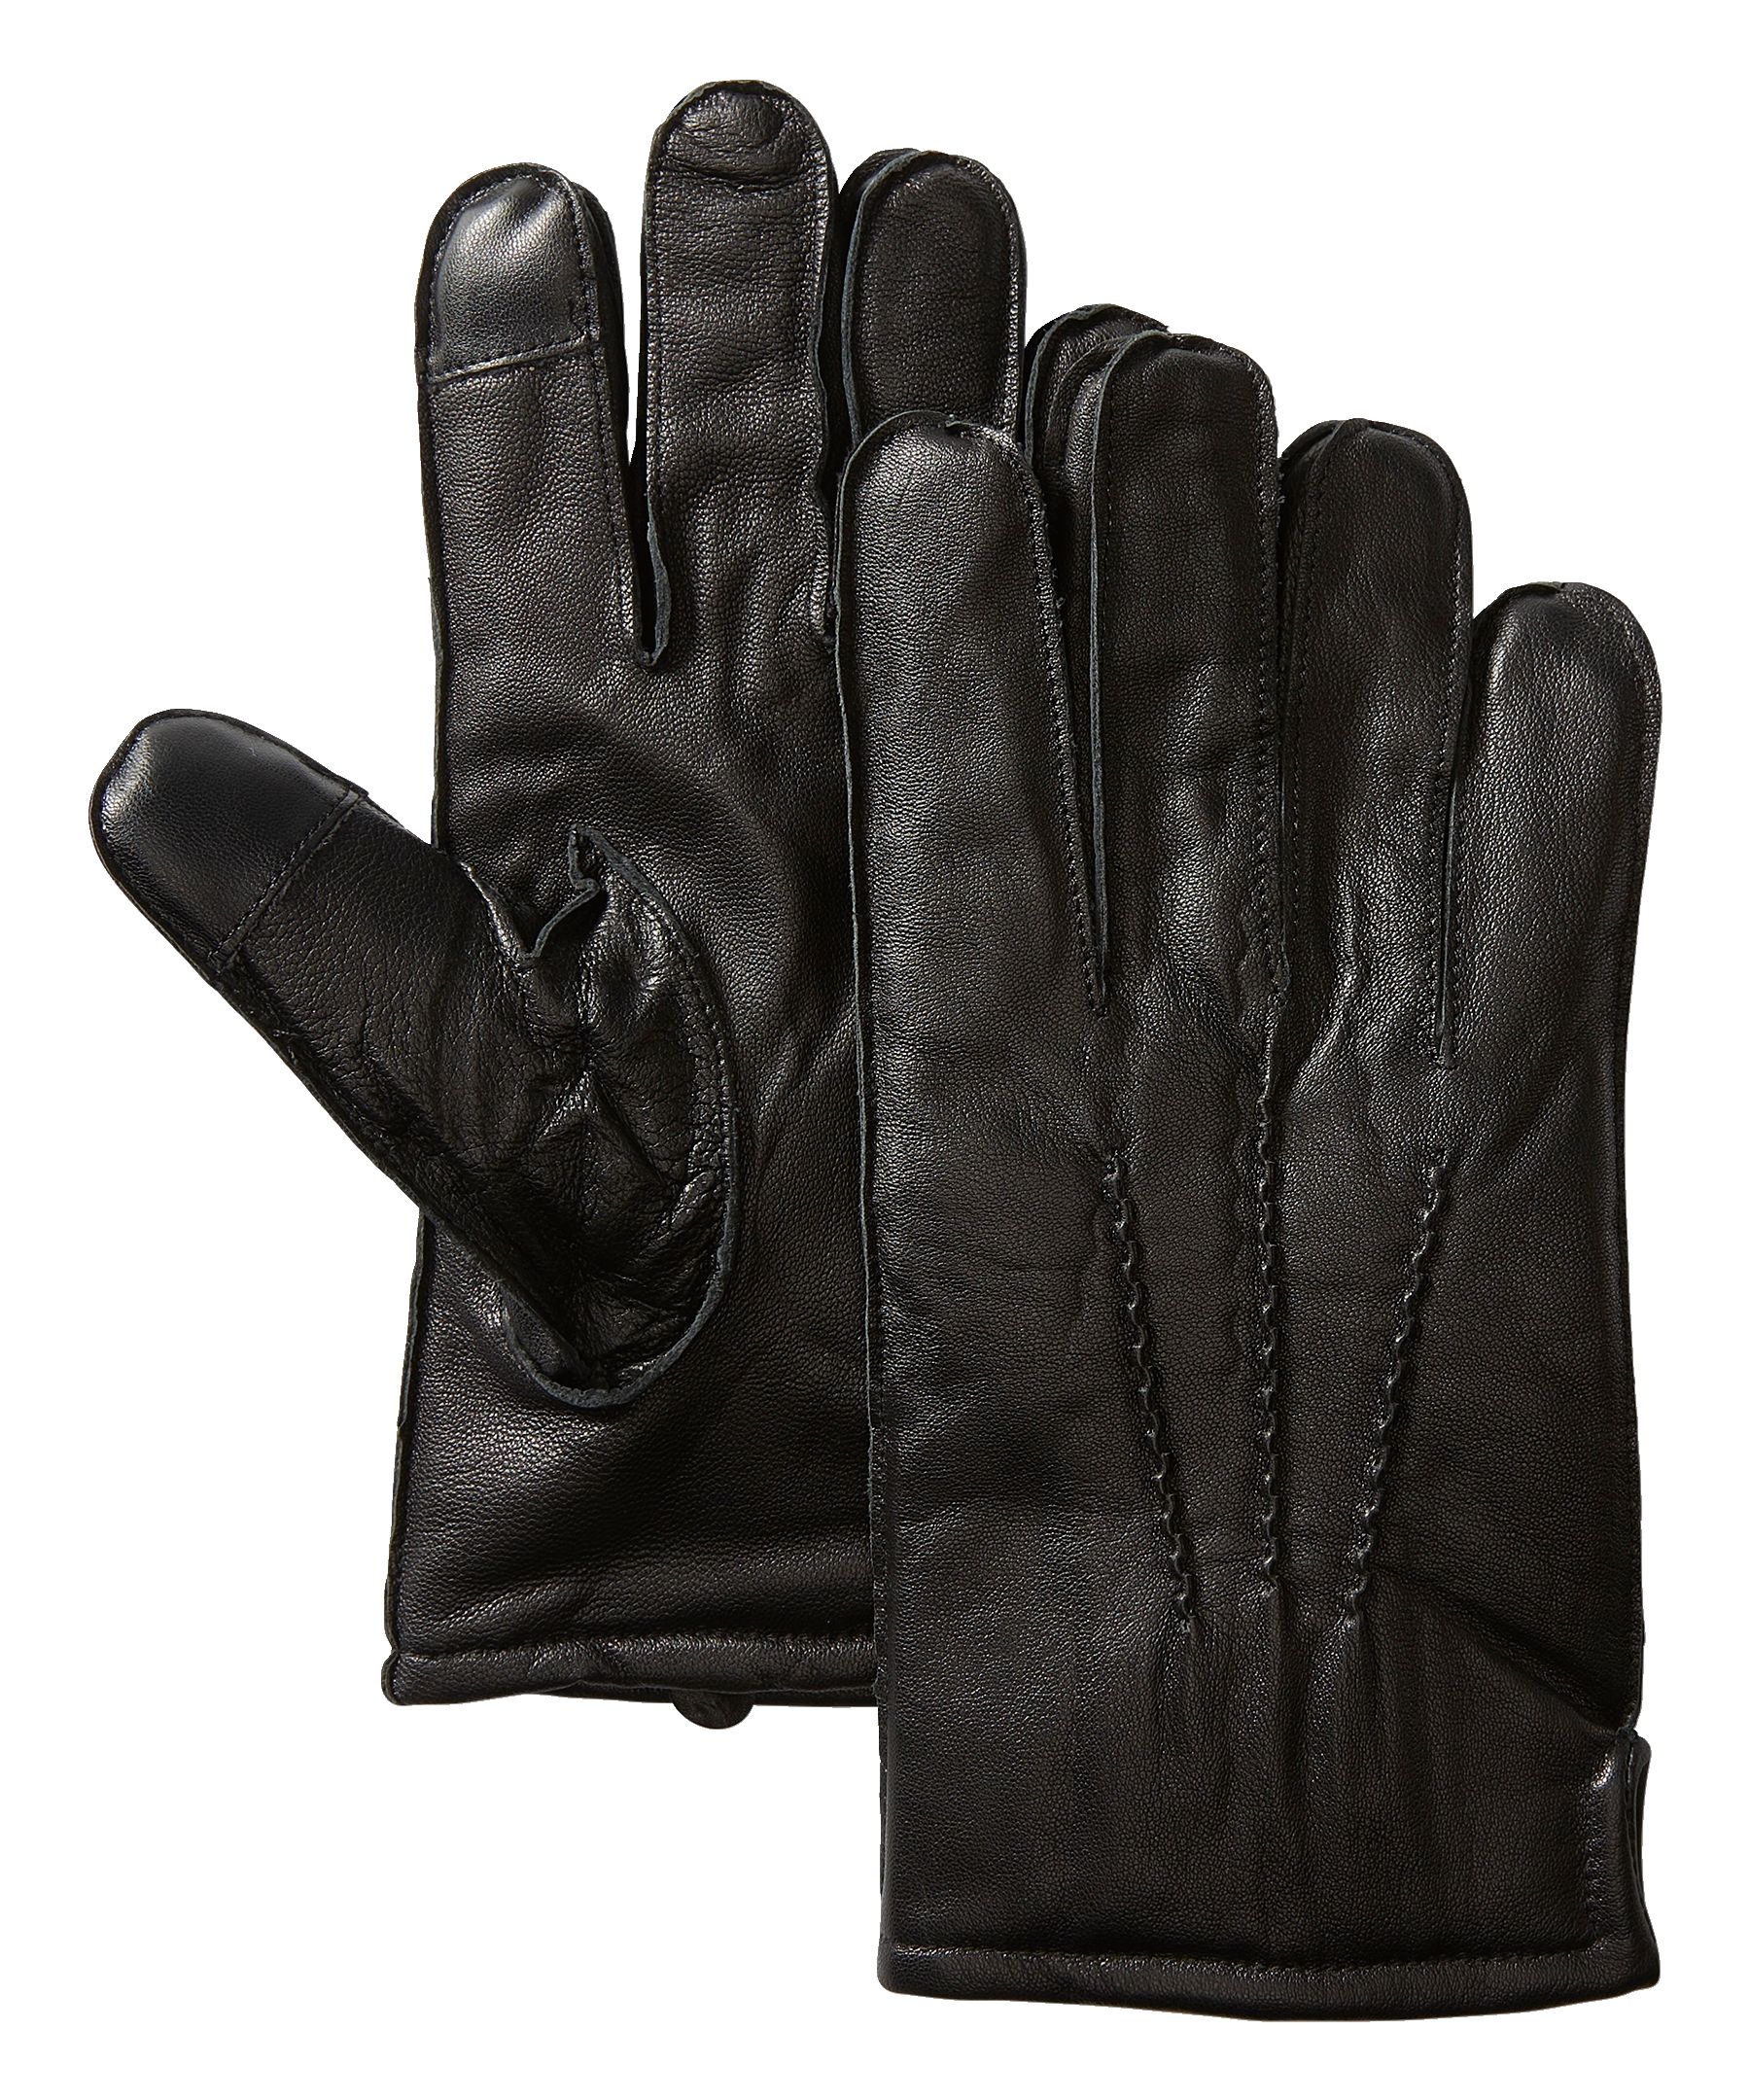 WindRiver Men's Glace Insulated Leather Glove with Lining | Marks